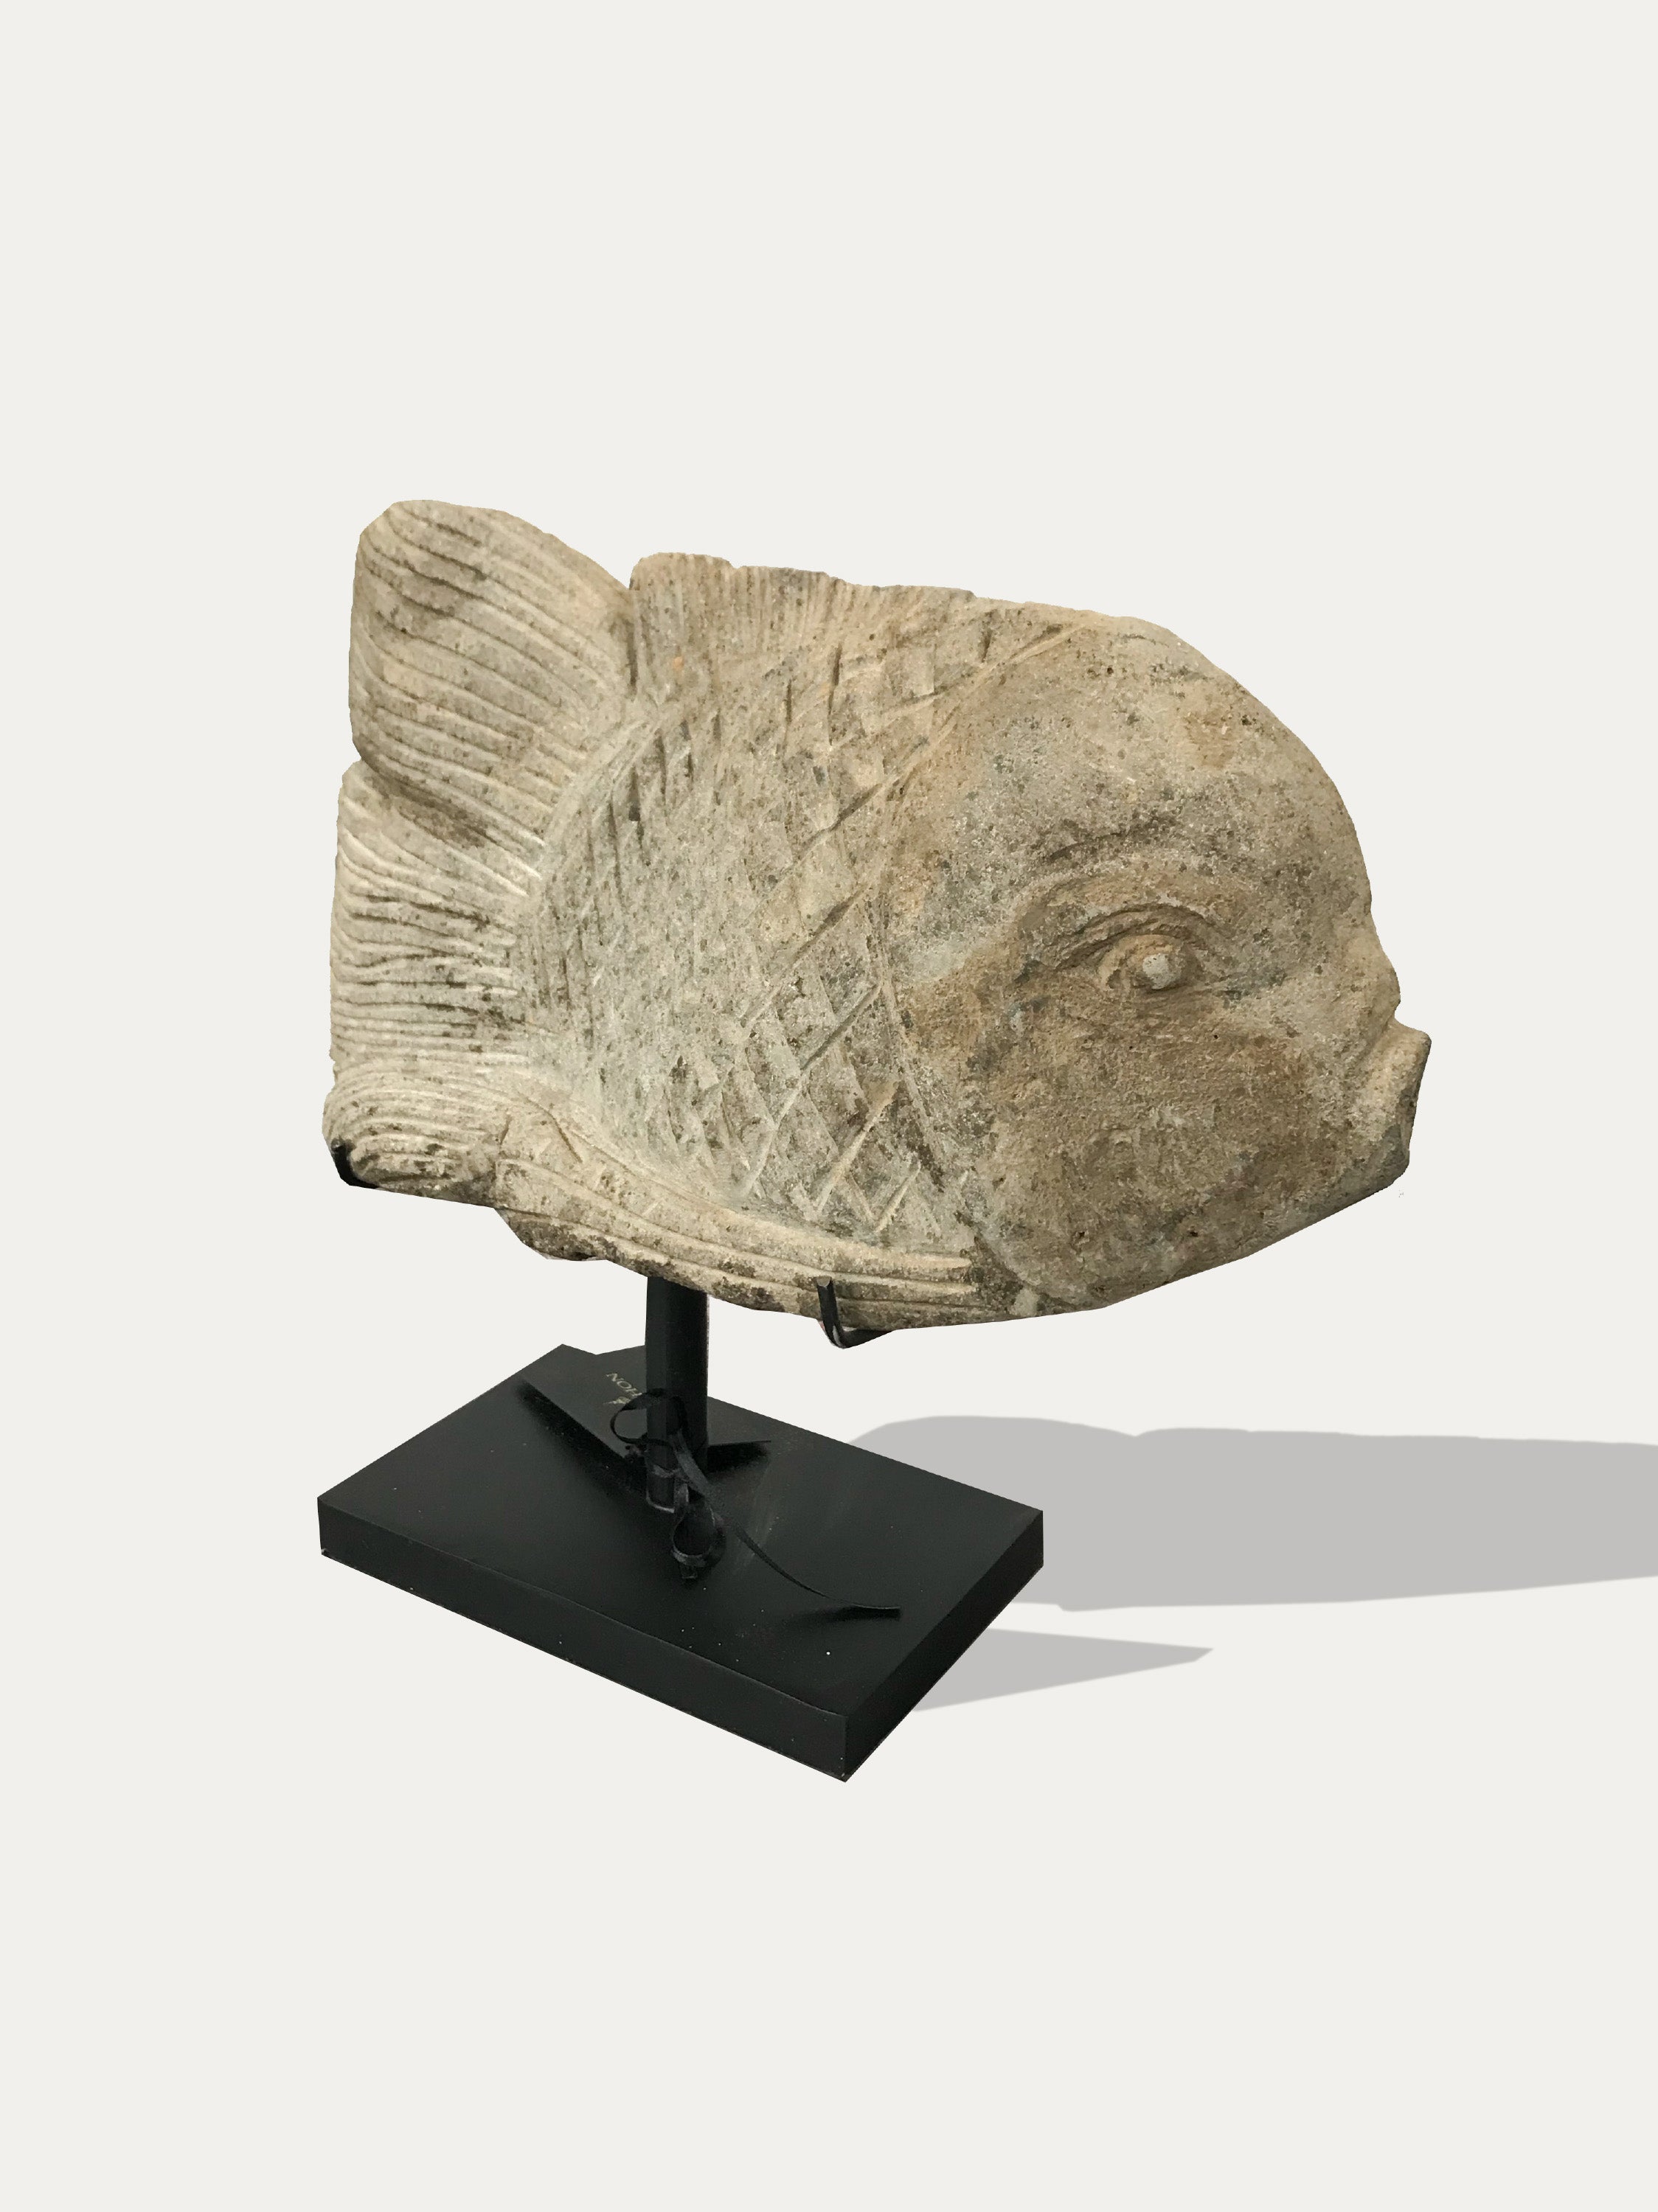 Ikan stone fish statue from Java - Asian Art from Kirschon